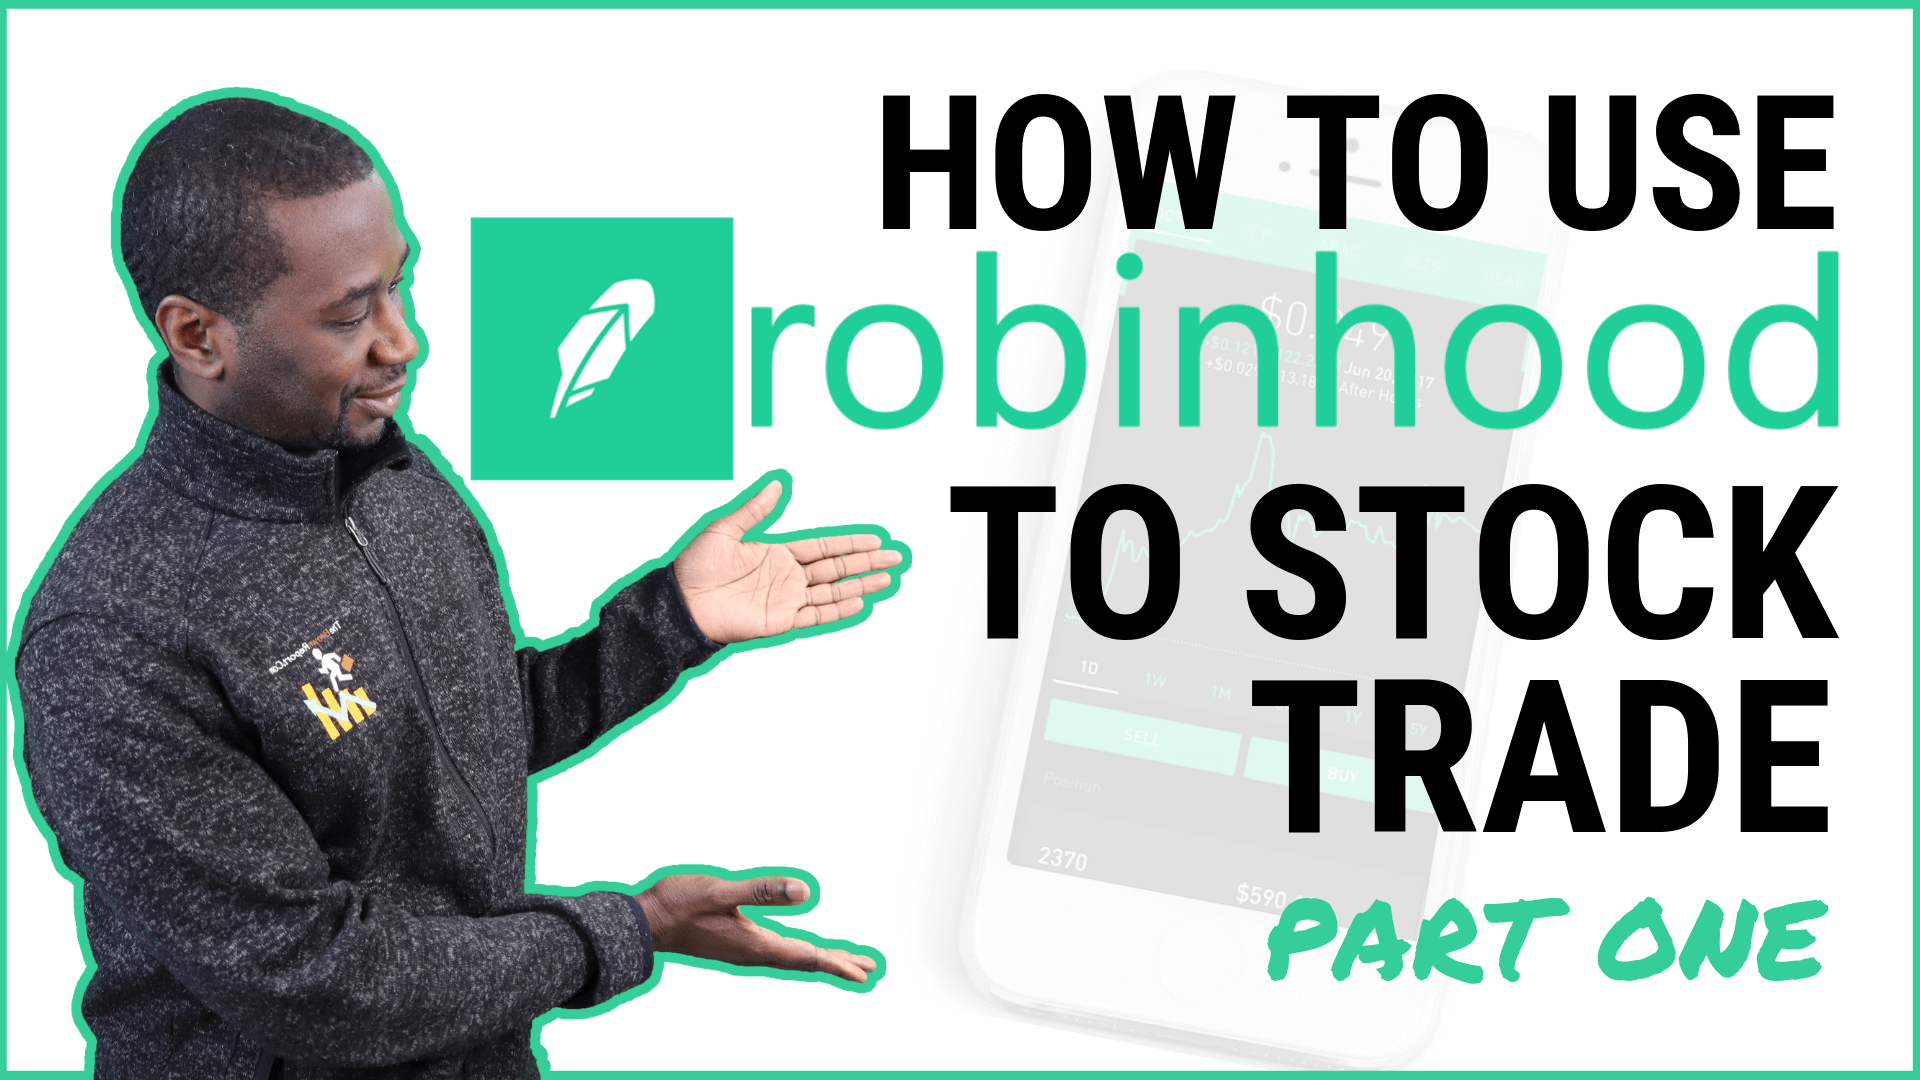 How to Use Robinhood: Part 1 “Investing & Trading Stocks”